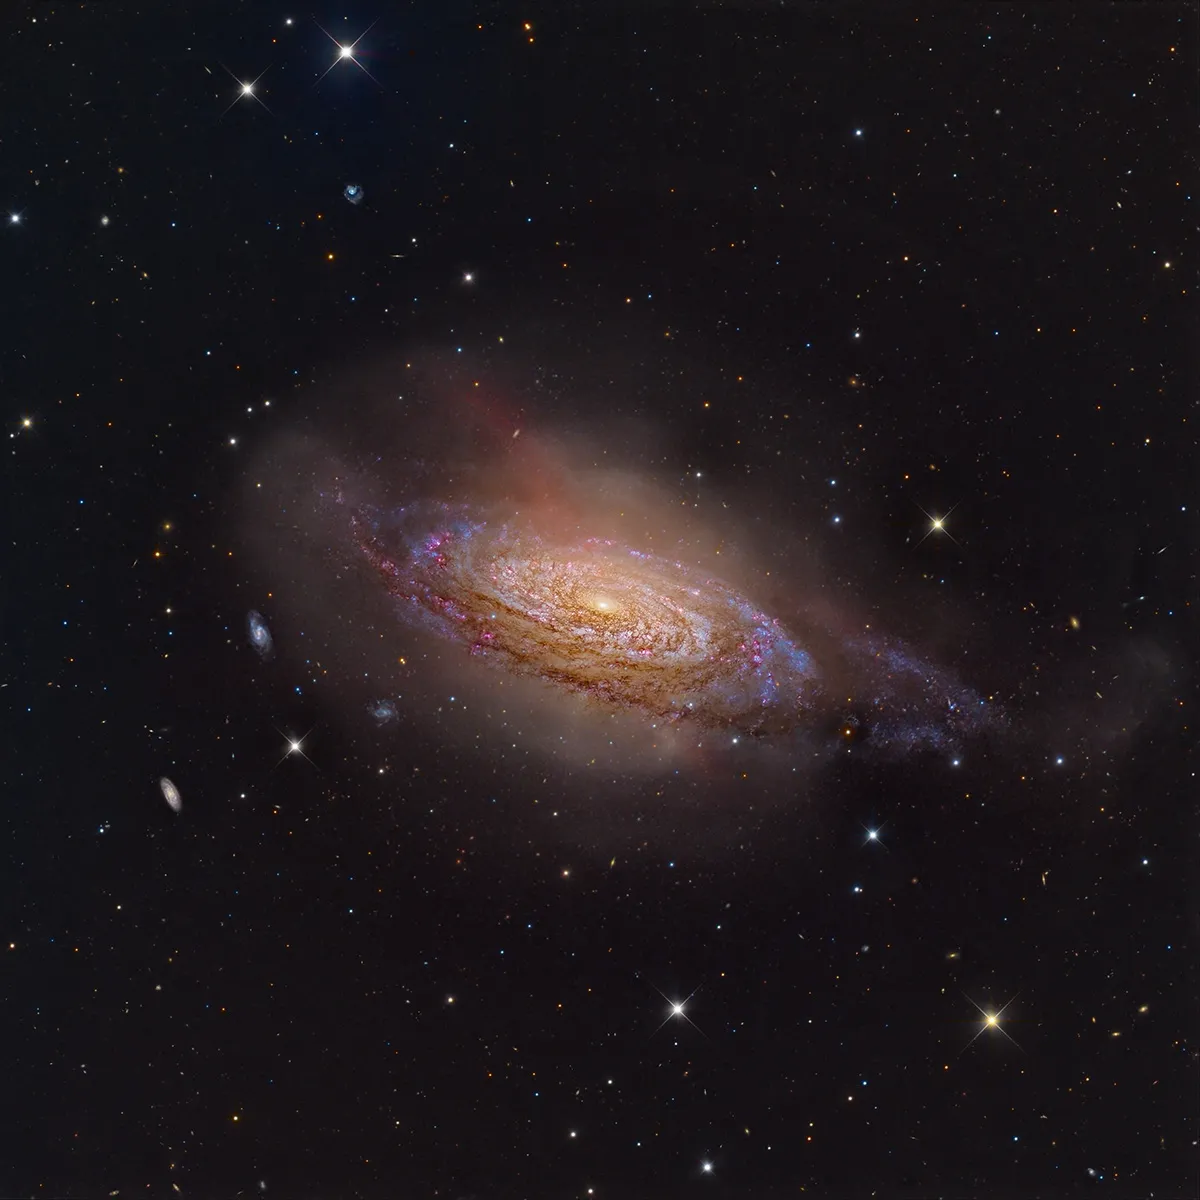 NGC 3521: Marquise in the Sky, by Mark Hanson; Mike Selby, El Sauce Observatory, Río Hurtado, Chile Category: Galaxies Equipment: Planewave CDK 1000 and CDK 700 telescopes, Chroma filters, FLI 16803 camera, 6,000 mm f/6 and 4,550 mm f/6.5, multiple 900-second Luminance exposures (19 hours total exposure), 5-hour exposure per RGB filter